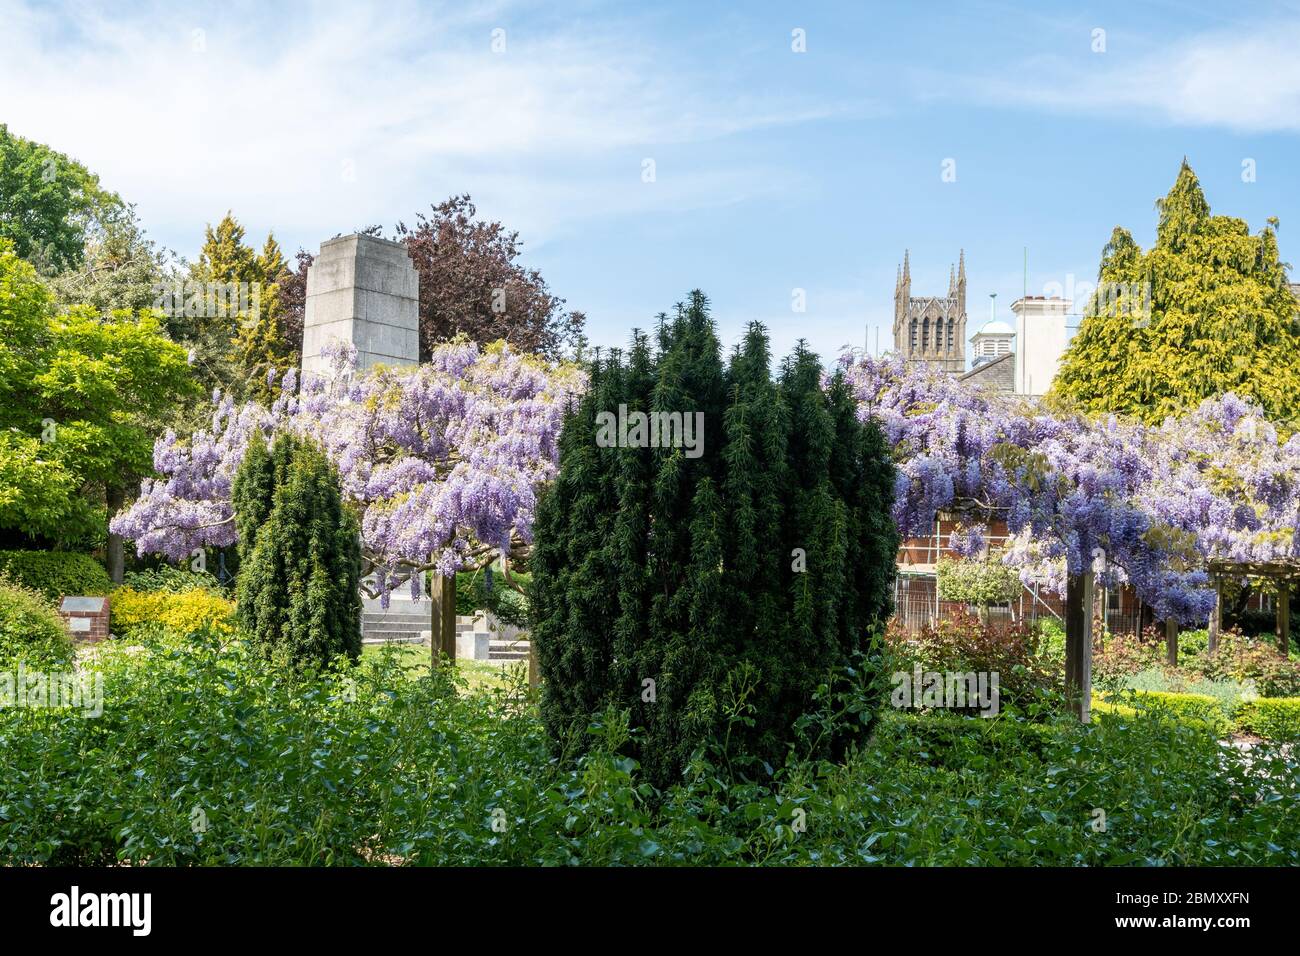 Municipal Gardens in the Hampshire town of Aldershot during May, with a wisteria covered pergola in flower, UK Stock Photo